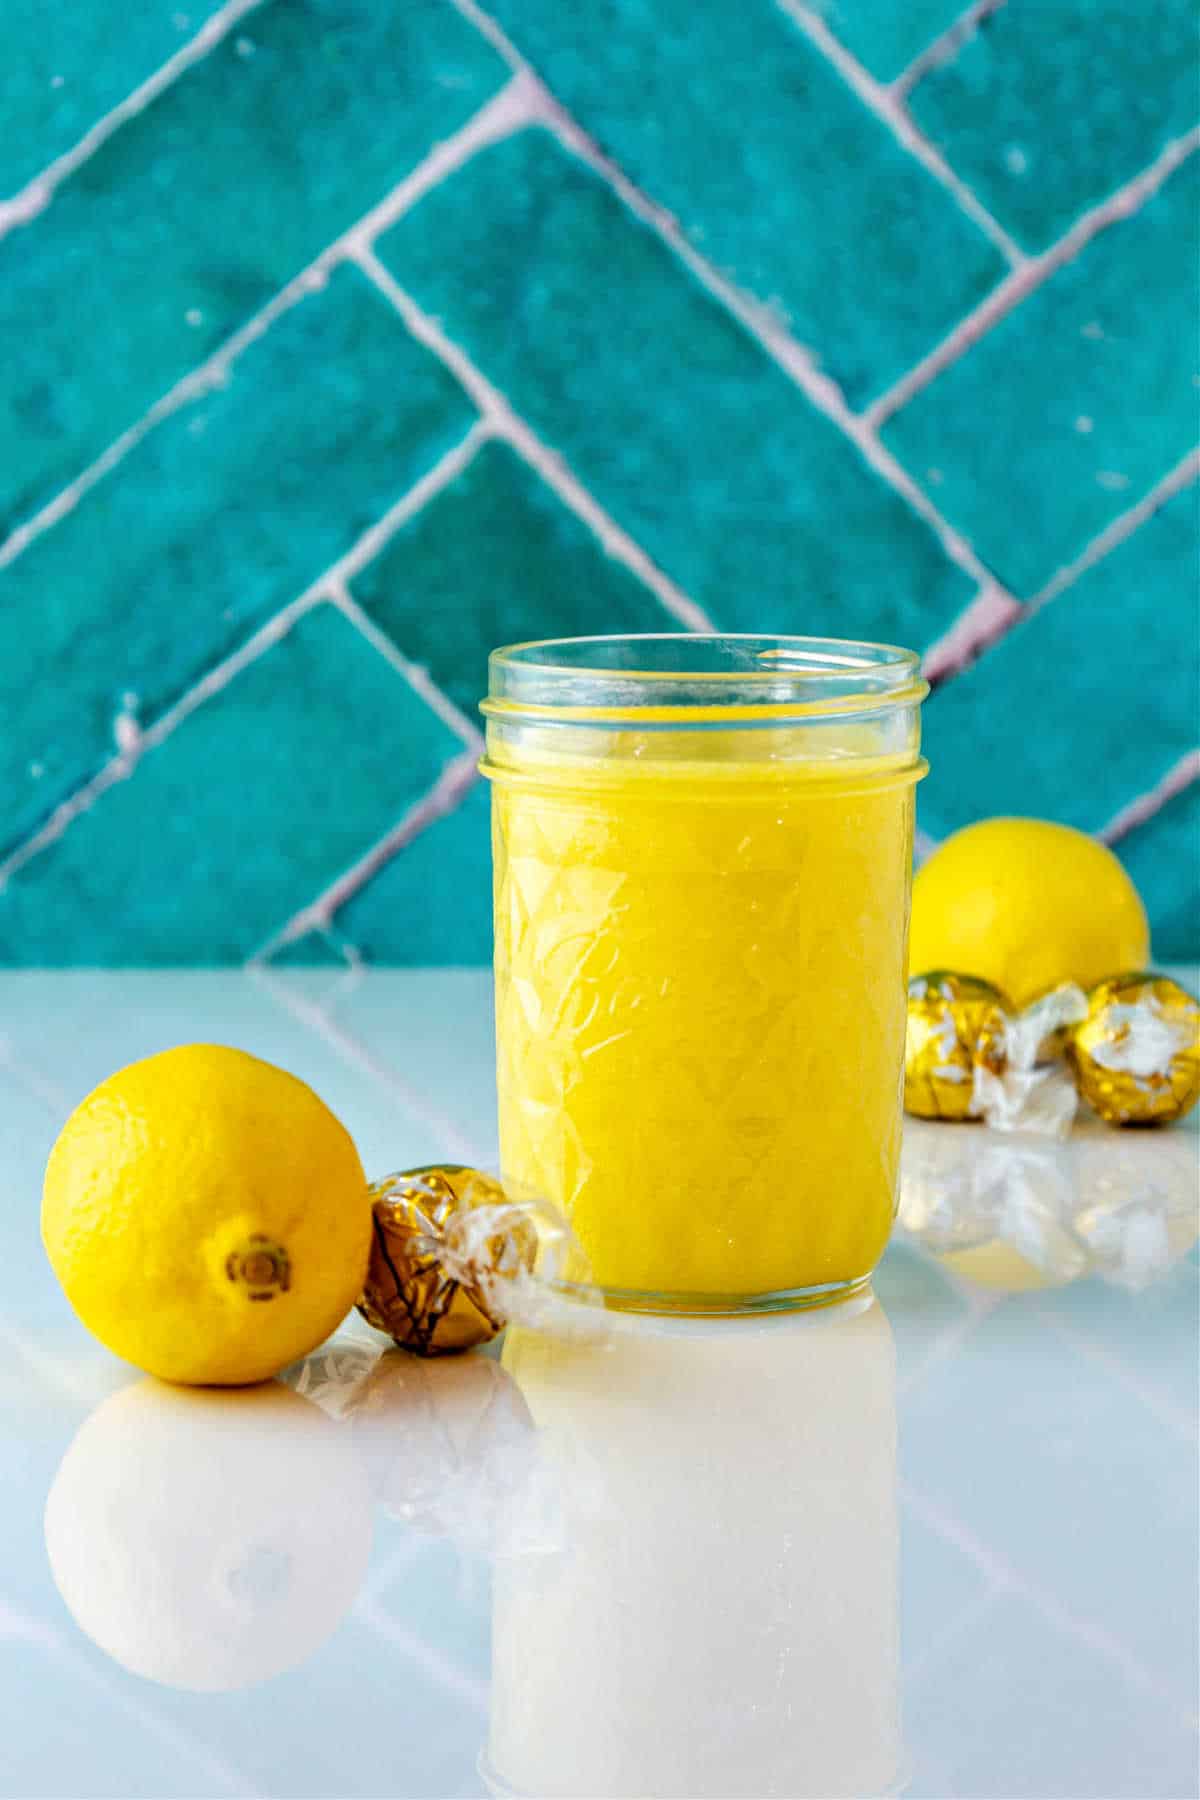 A clear glass jar of lemon curd on a white reflective surface with white chocolate truffles wrapped in foil and lemons.